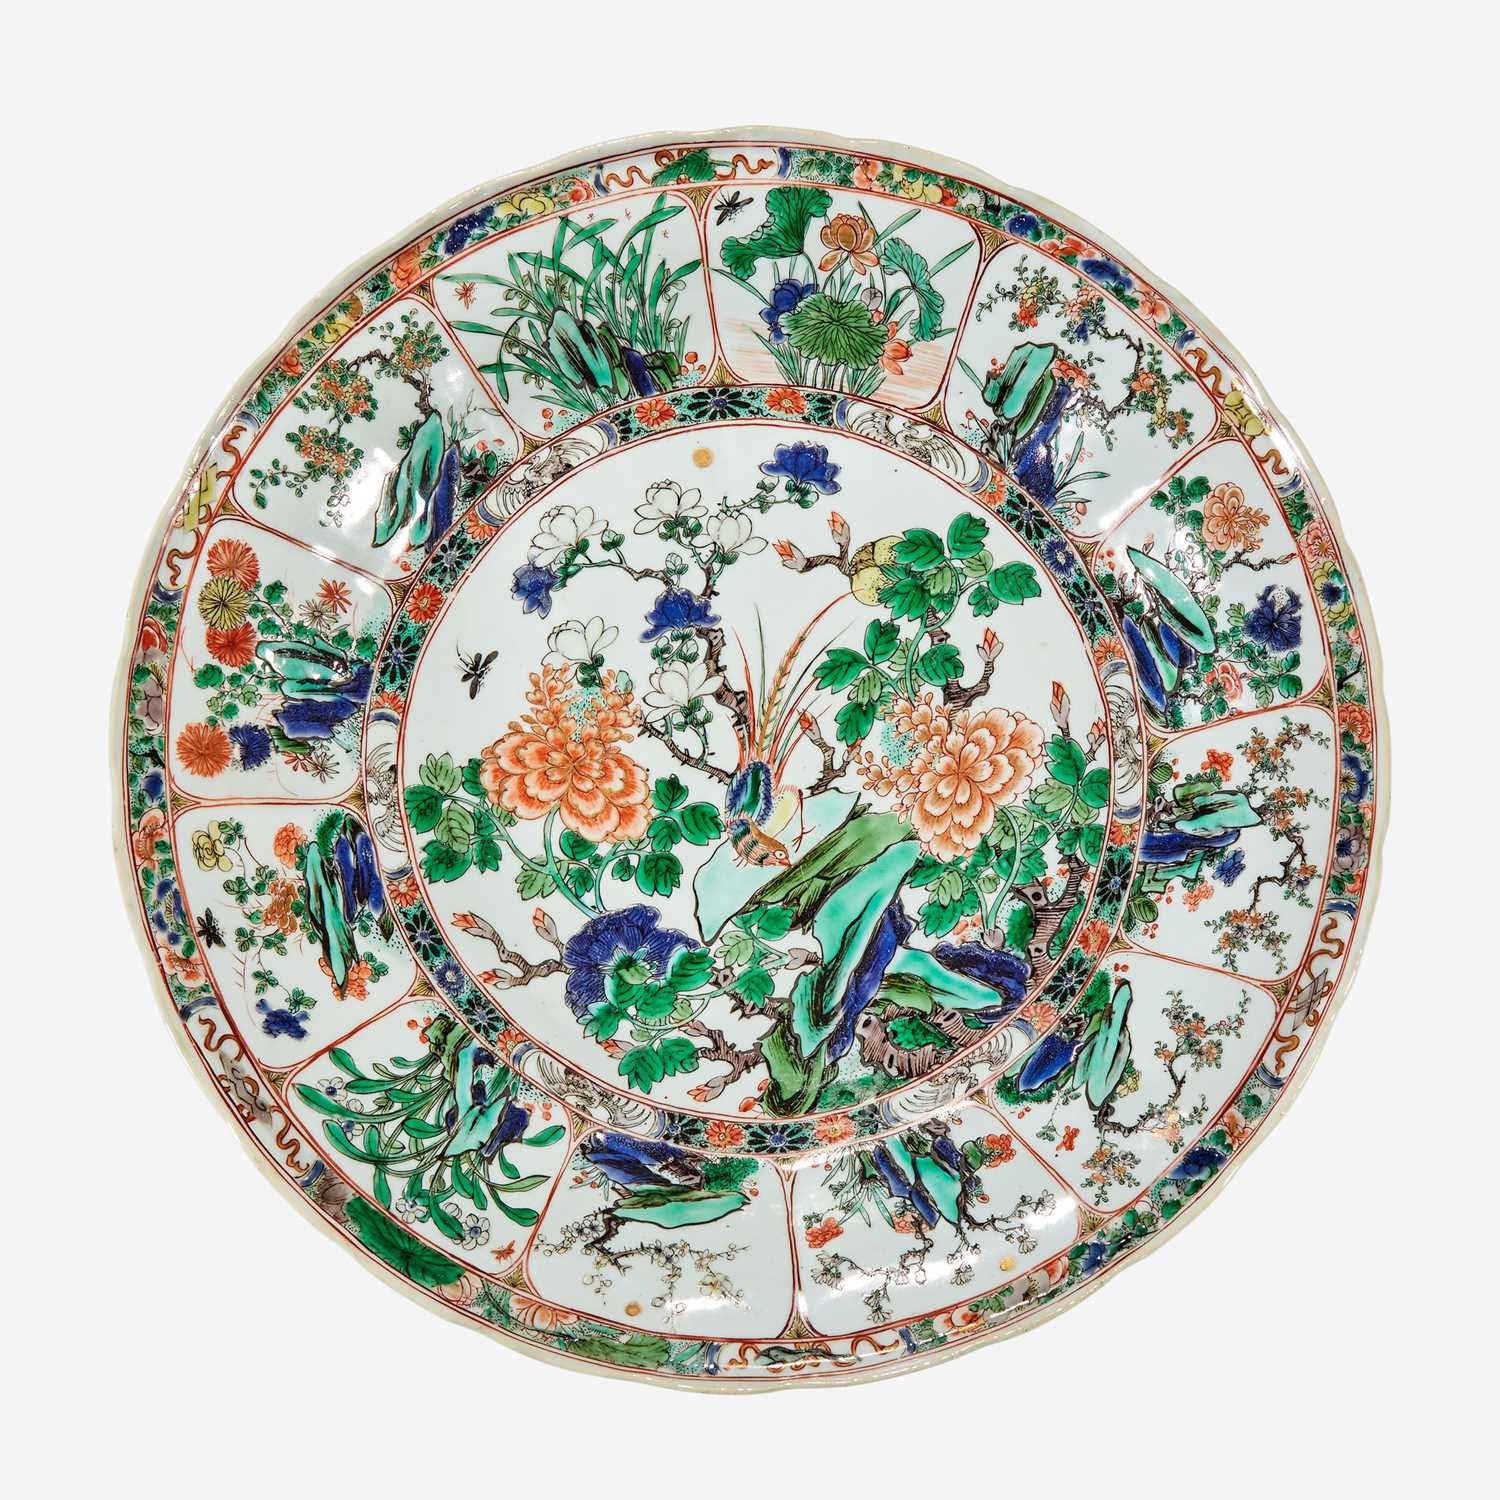 Lot 65 - A Chinese famille verte-decorated porcelain lobed dish